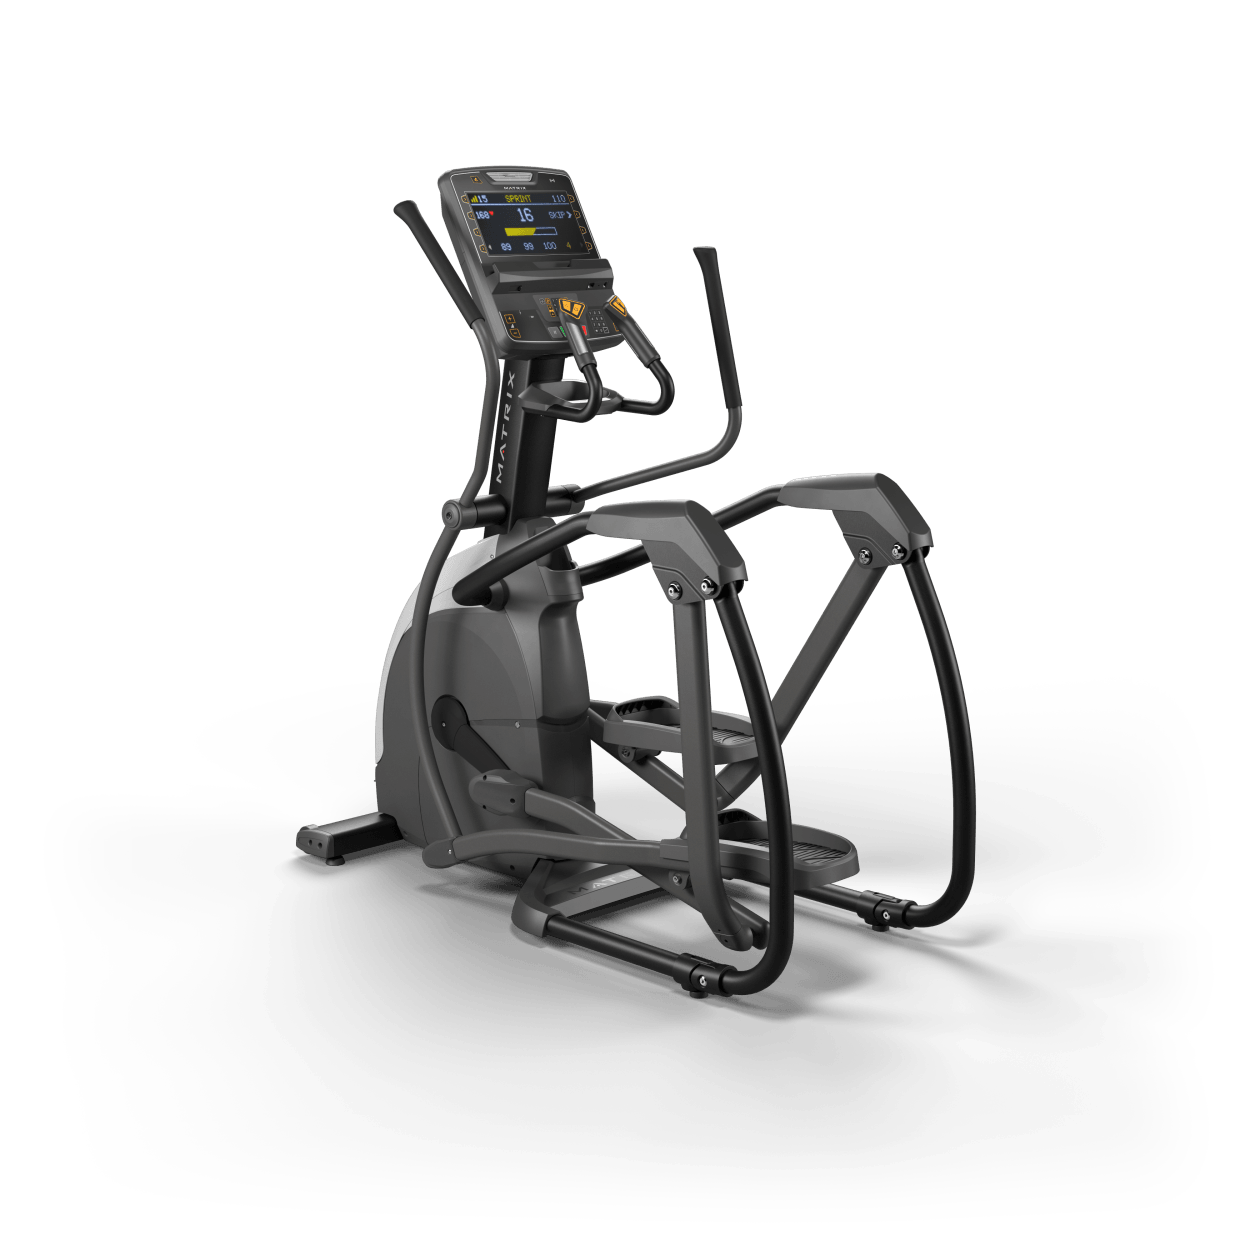 Matrix Fitness Endurance Elliptical with Premium LED Console full view | Fitness Experience